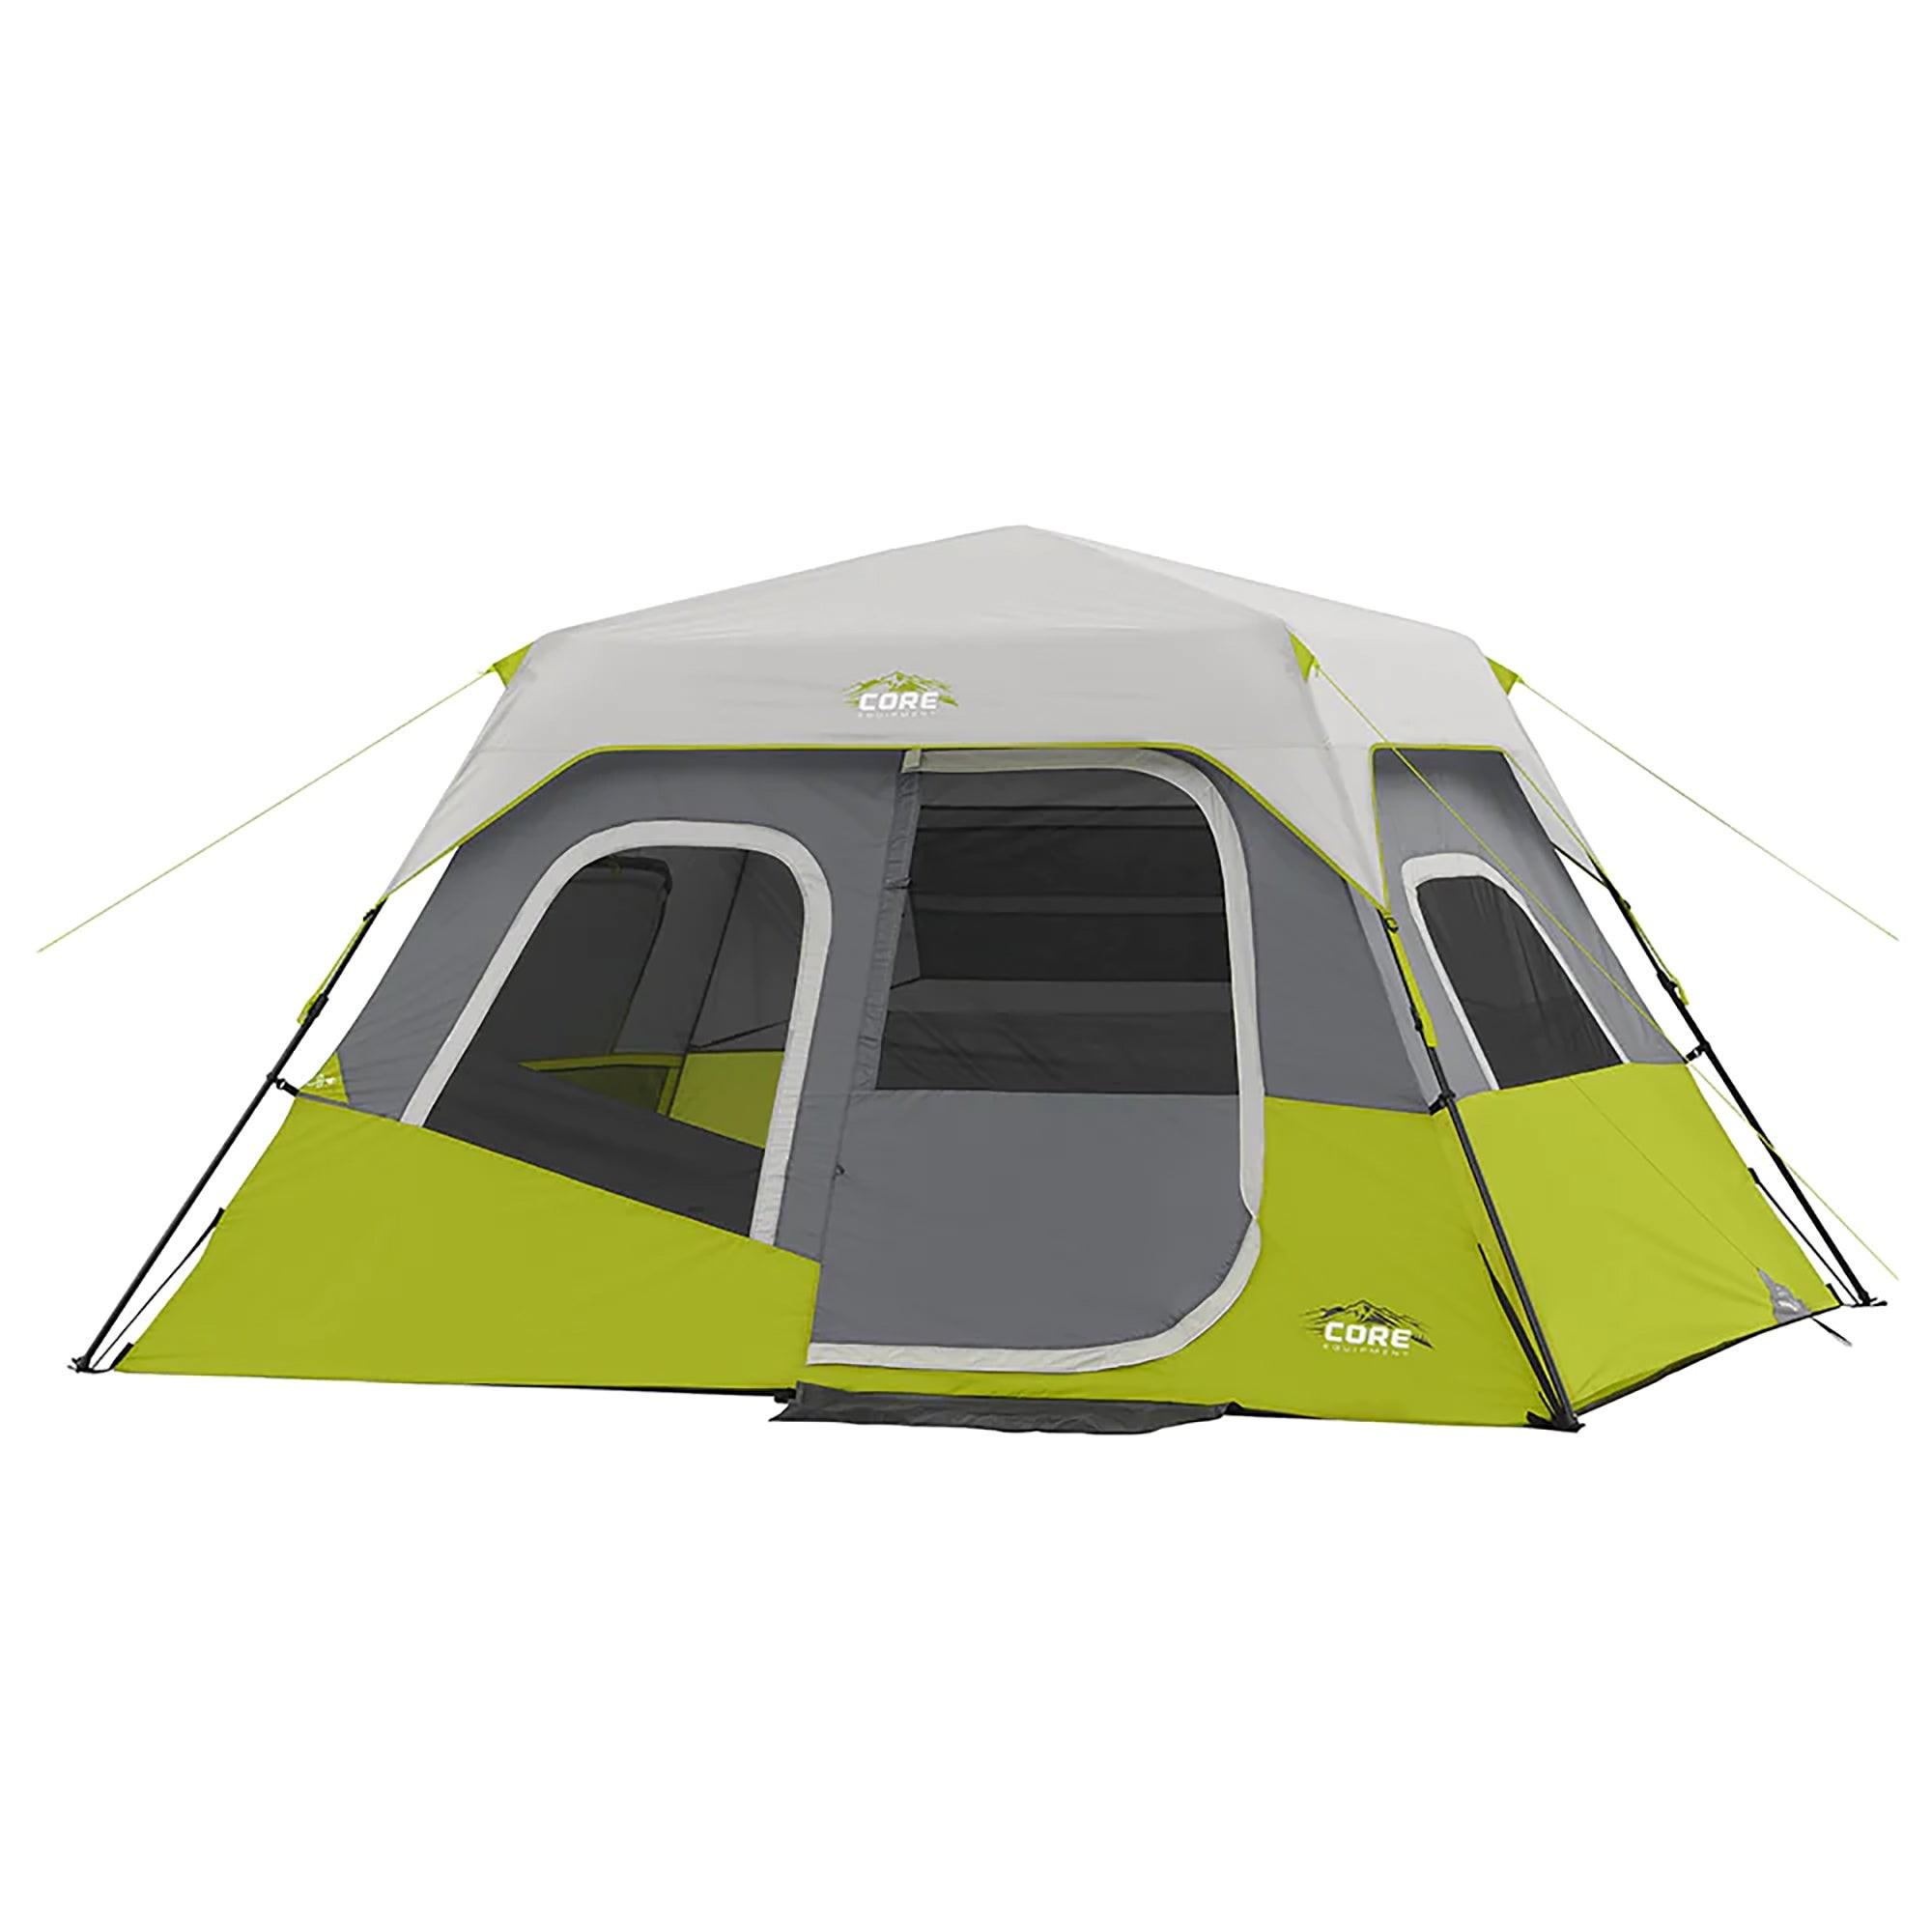 6 Person Instant Cabin Tent - 11ft x 9ft Cool Dark Gray/Green